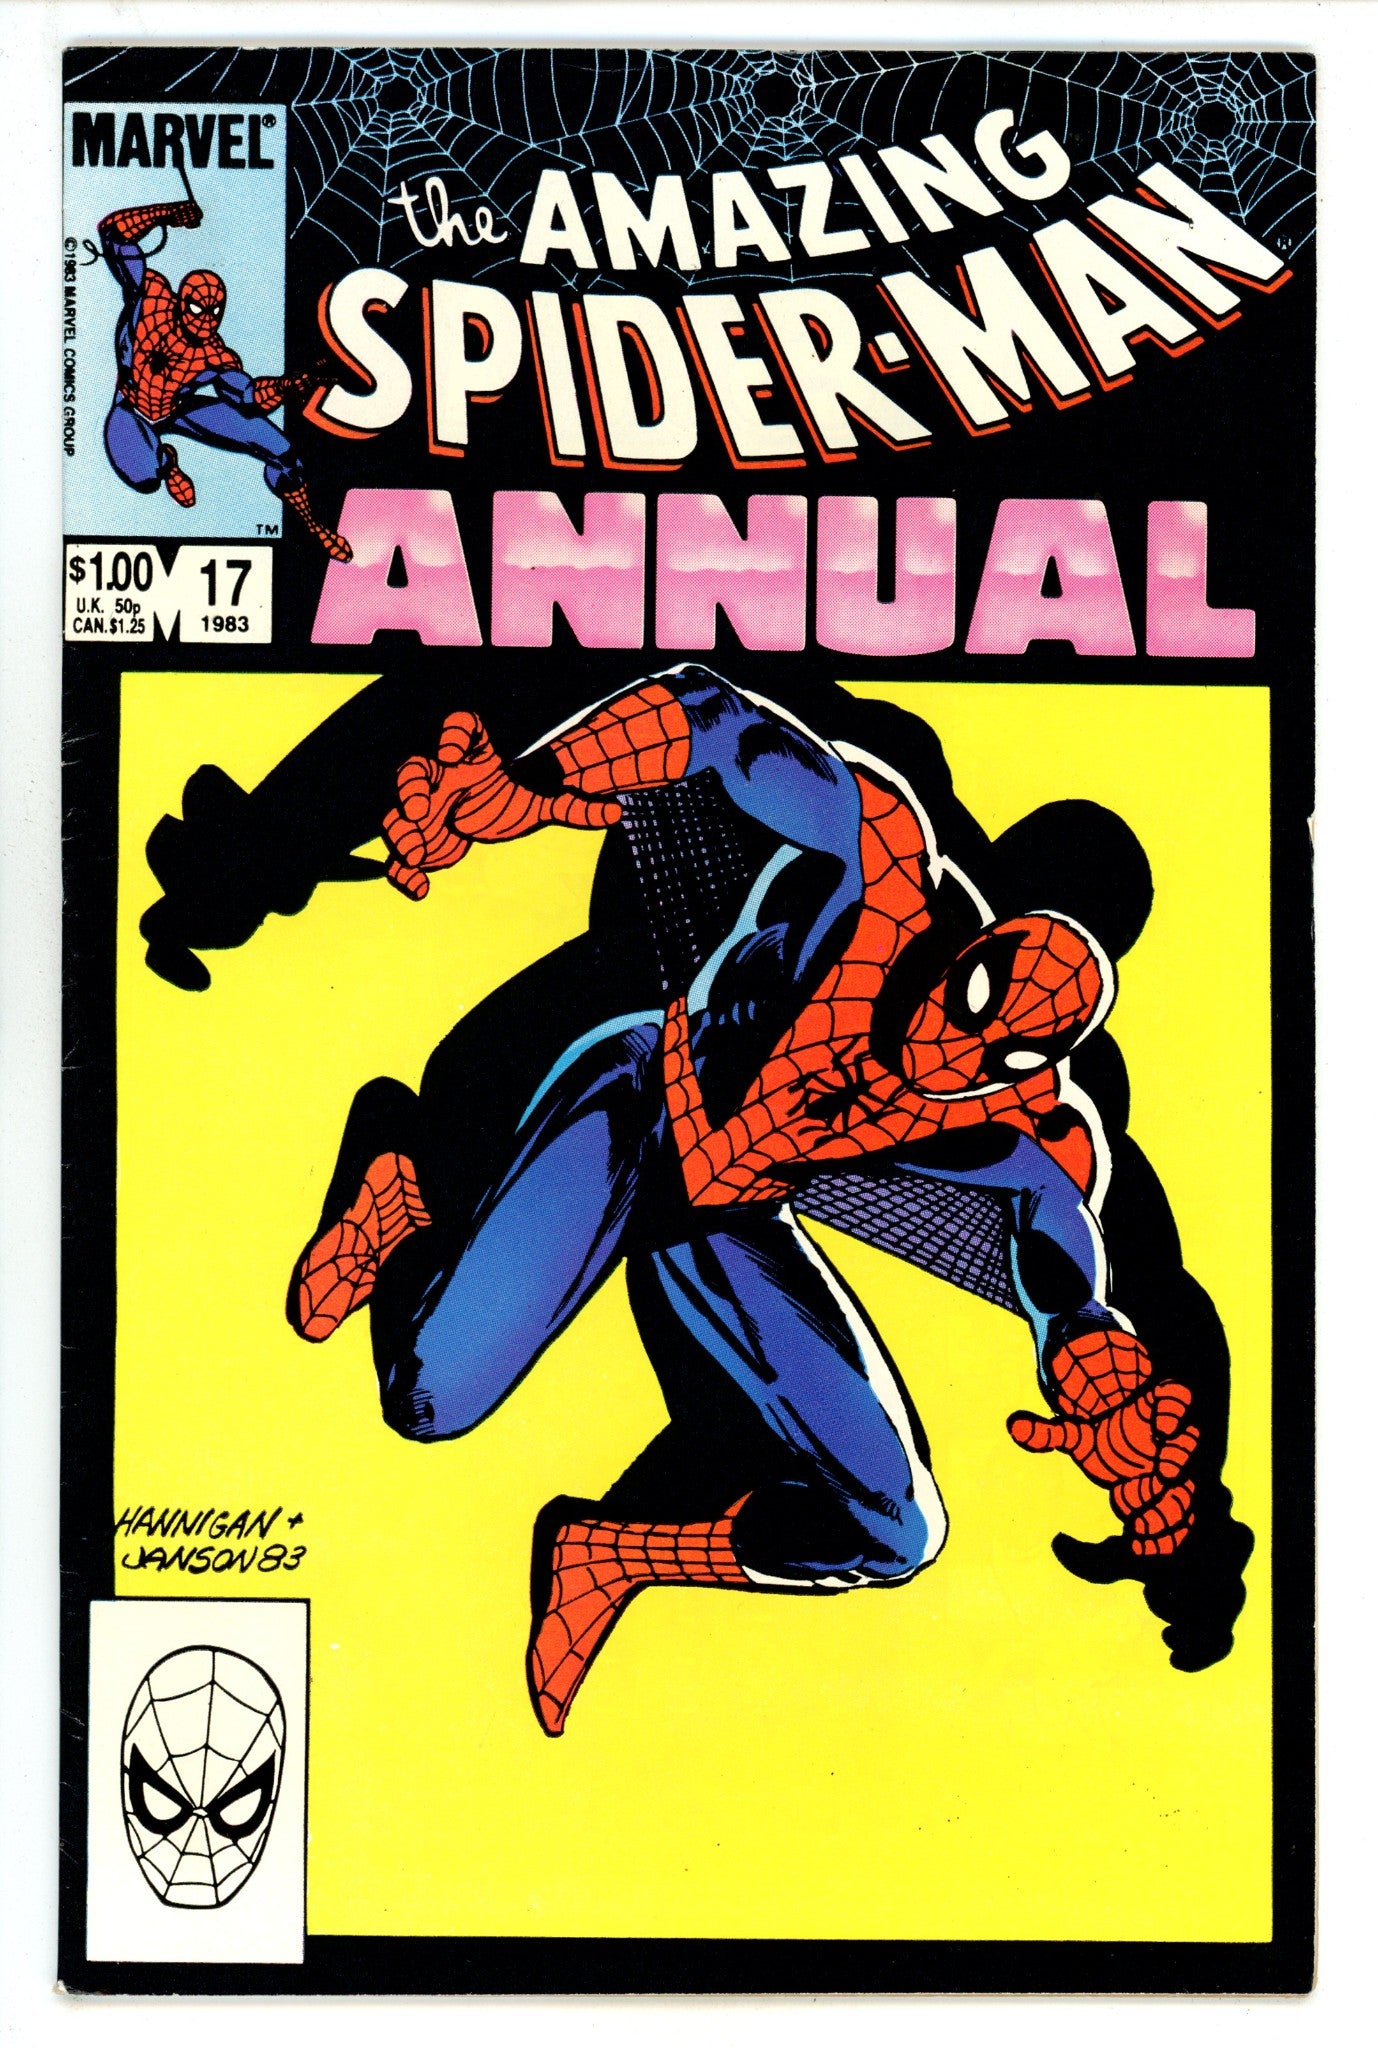 The Amazing Spider-Man Annual Vol 1 17 FN- (5.5) (1983) 